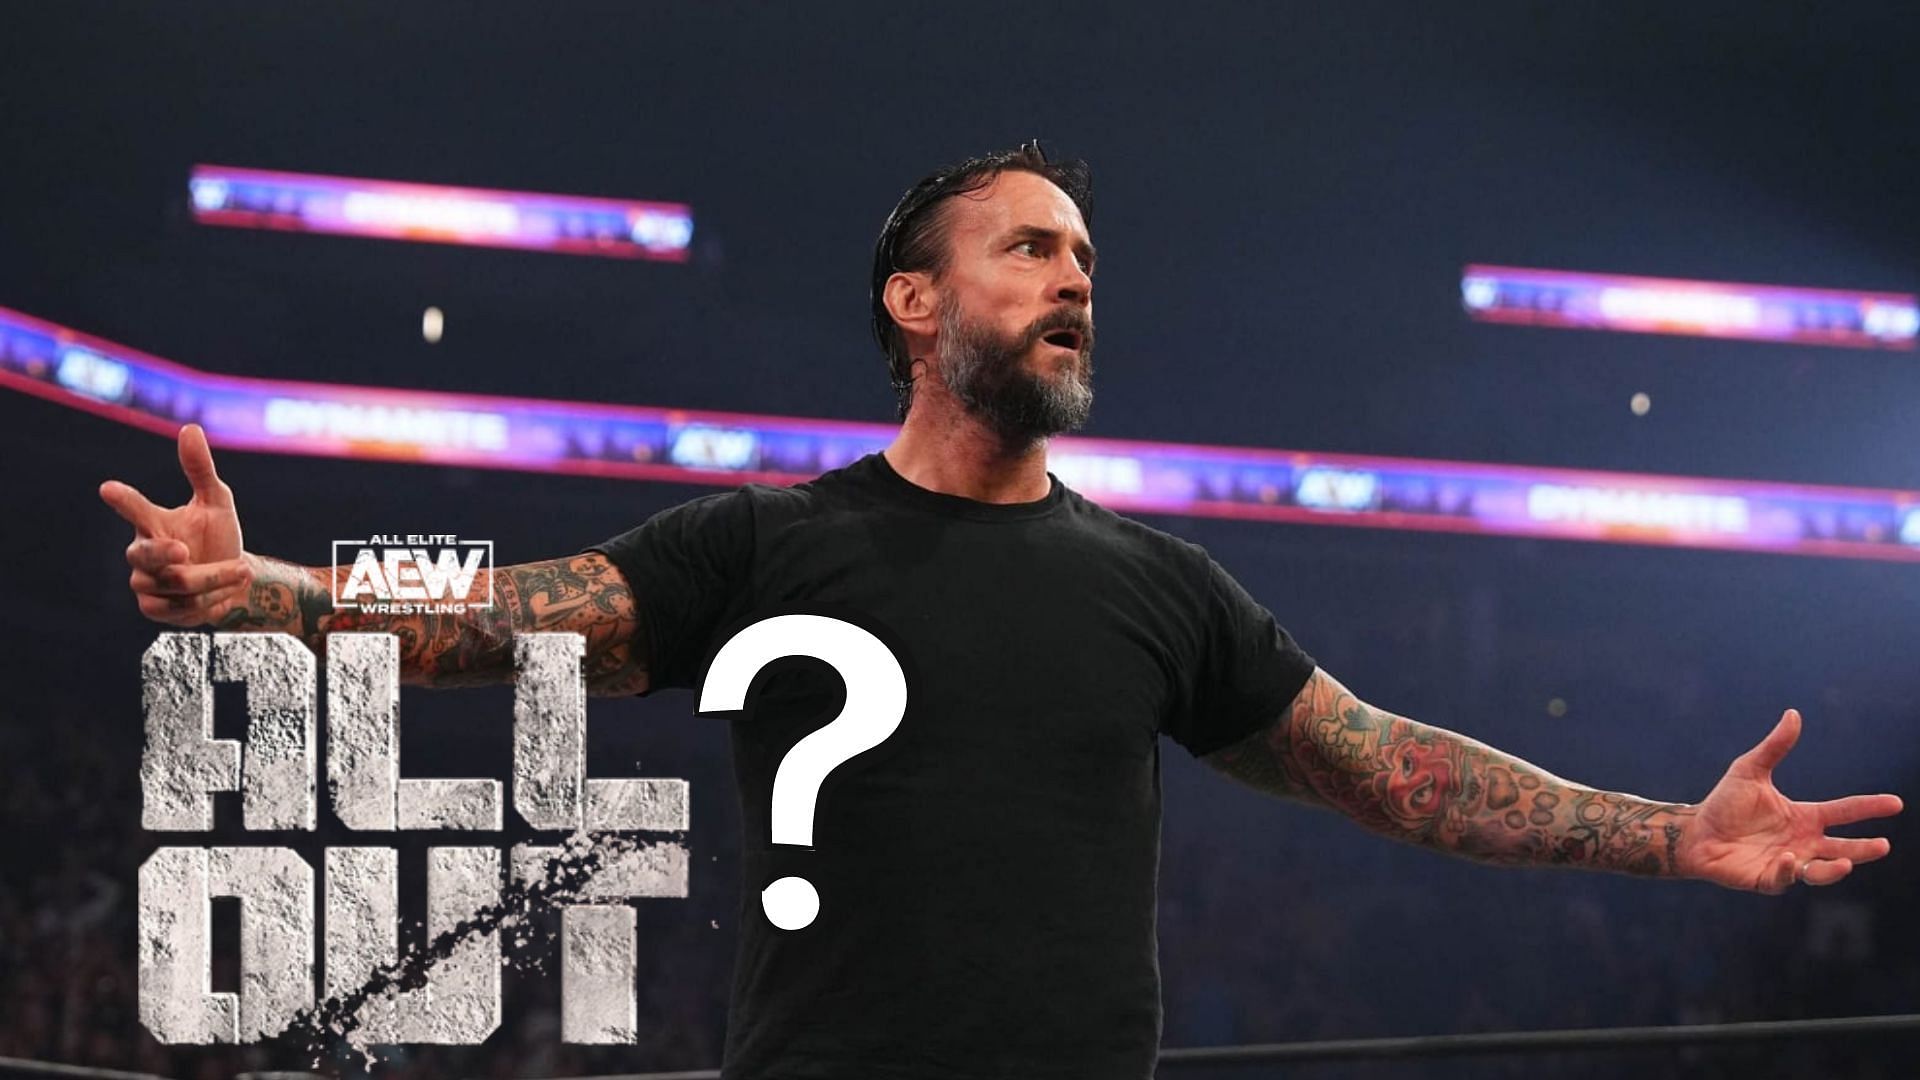 CM Punk made his return this past week on AEW Dynamite